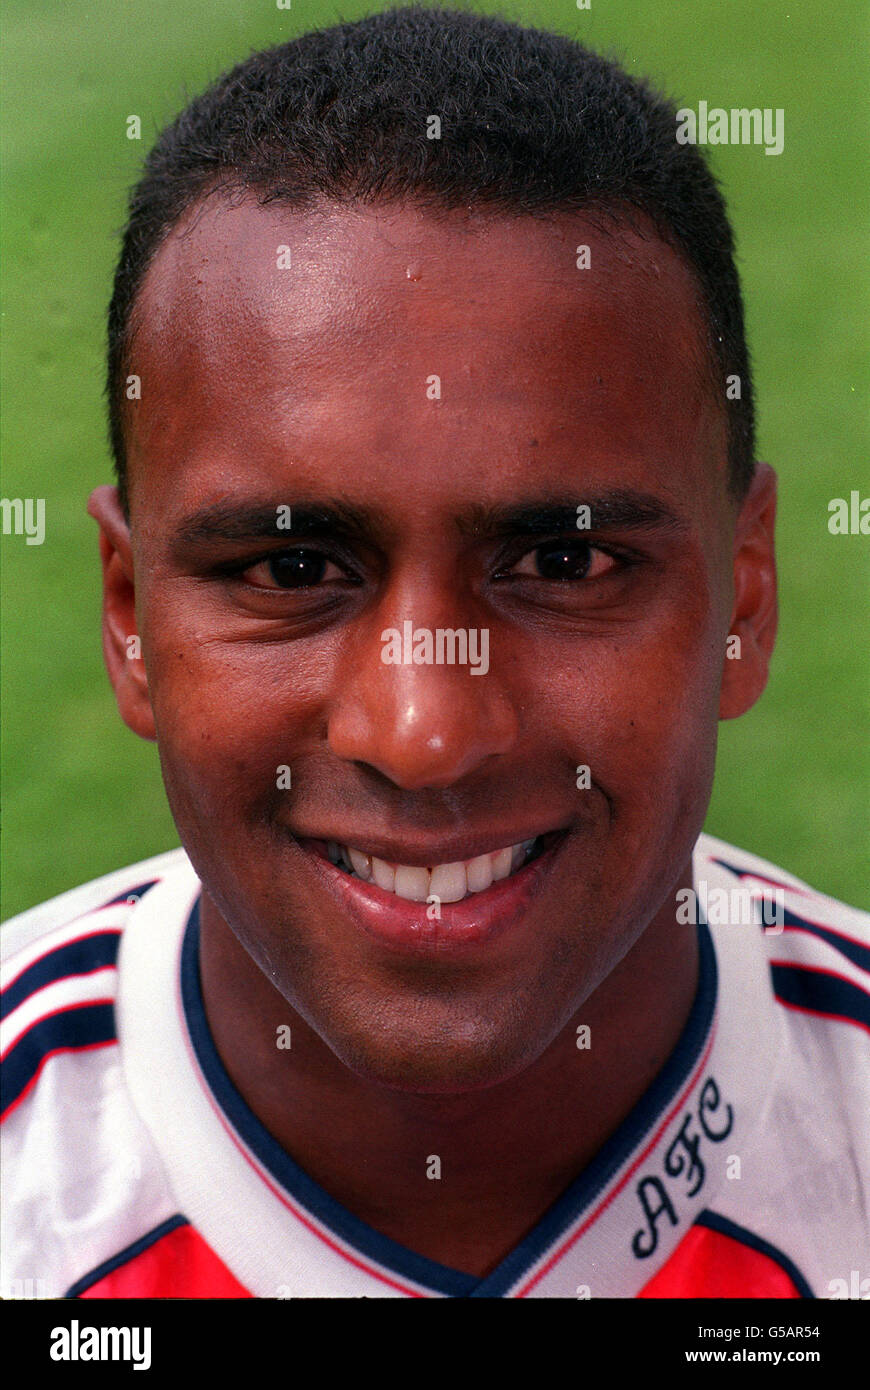 Arsenal midfielder David Rocastle in 1991. 31/03/01: Former England, Arsenal and Leeds United footballer David Rocastle dies, aged of 33, after losing his battle with non-Hodgkin's lymphoma. Stock Photo